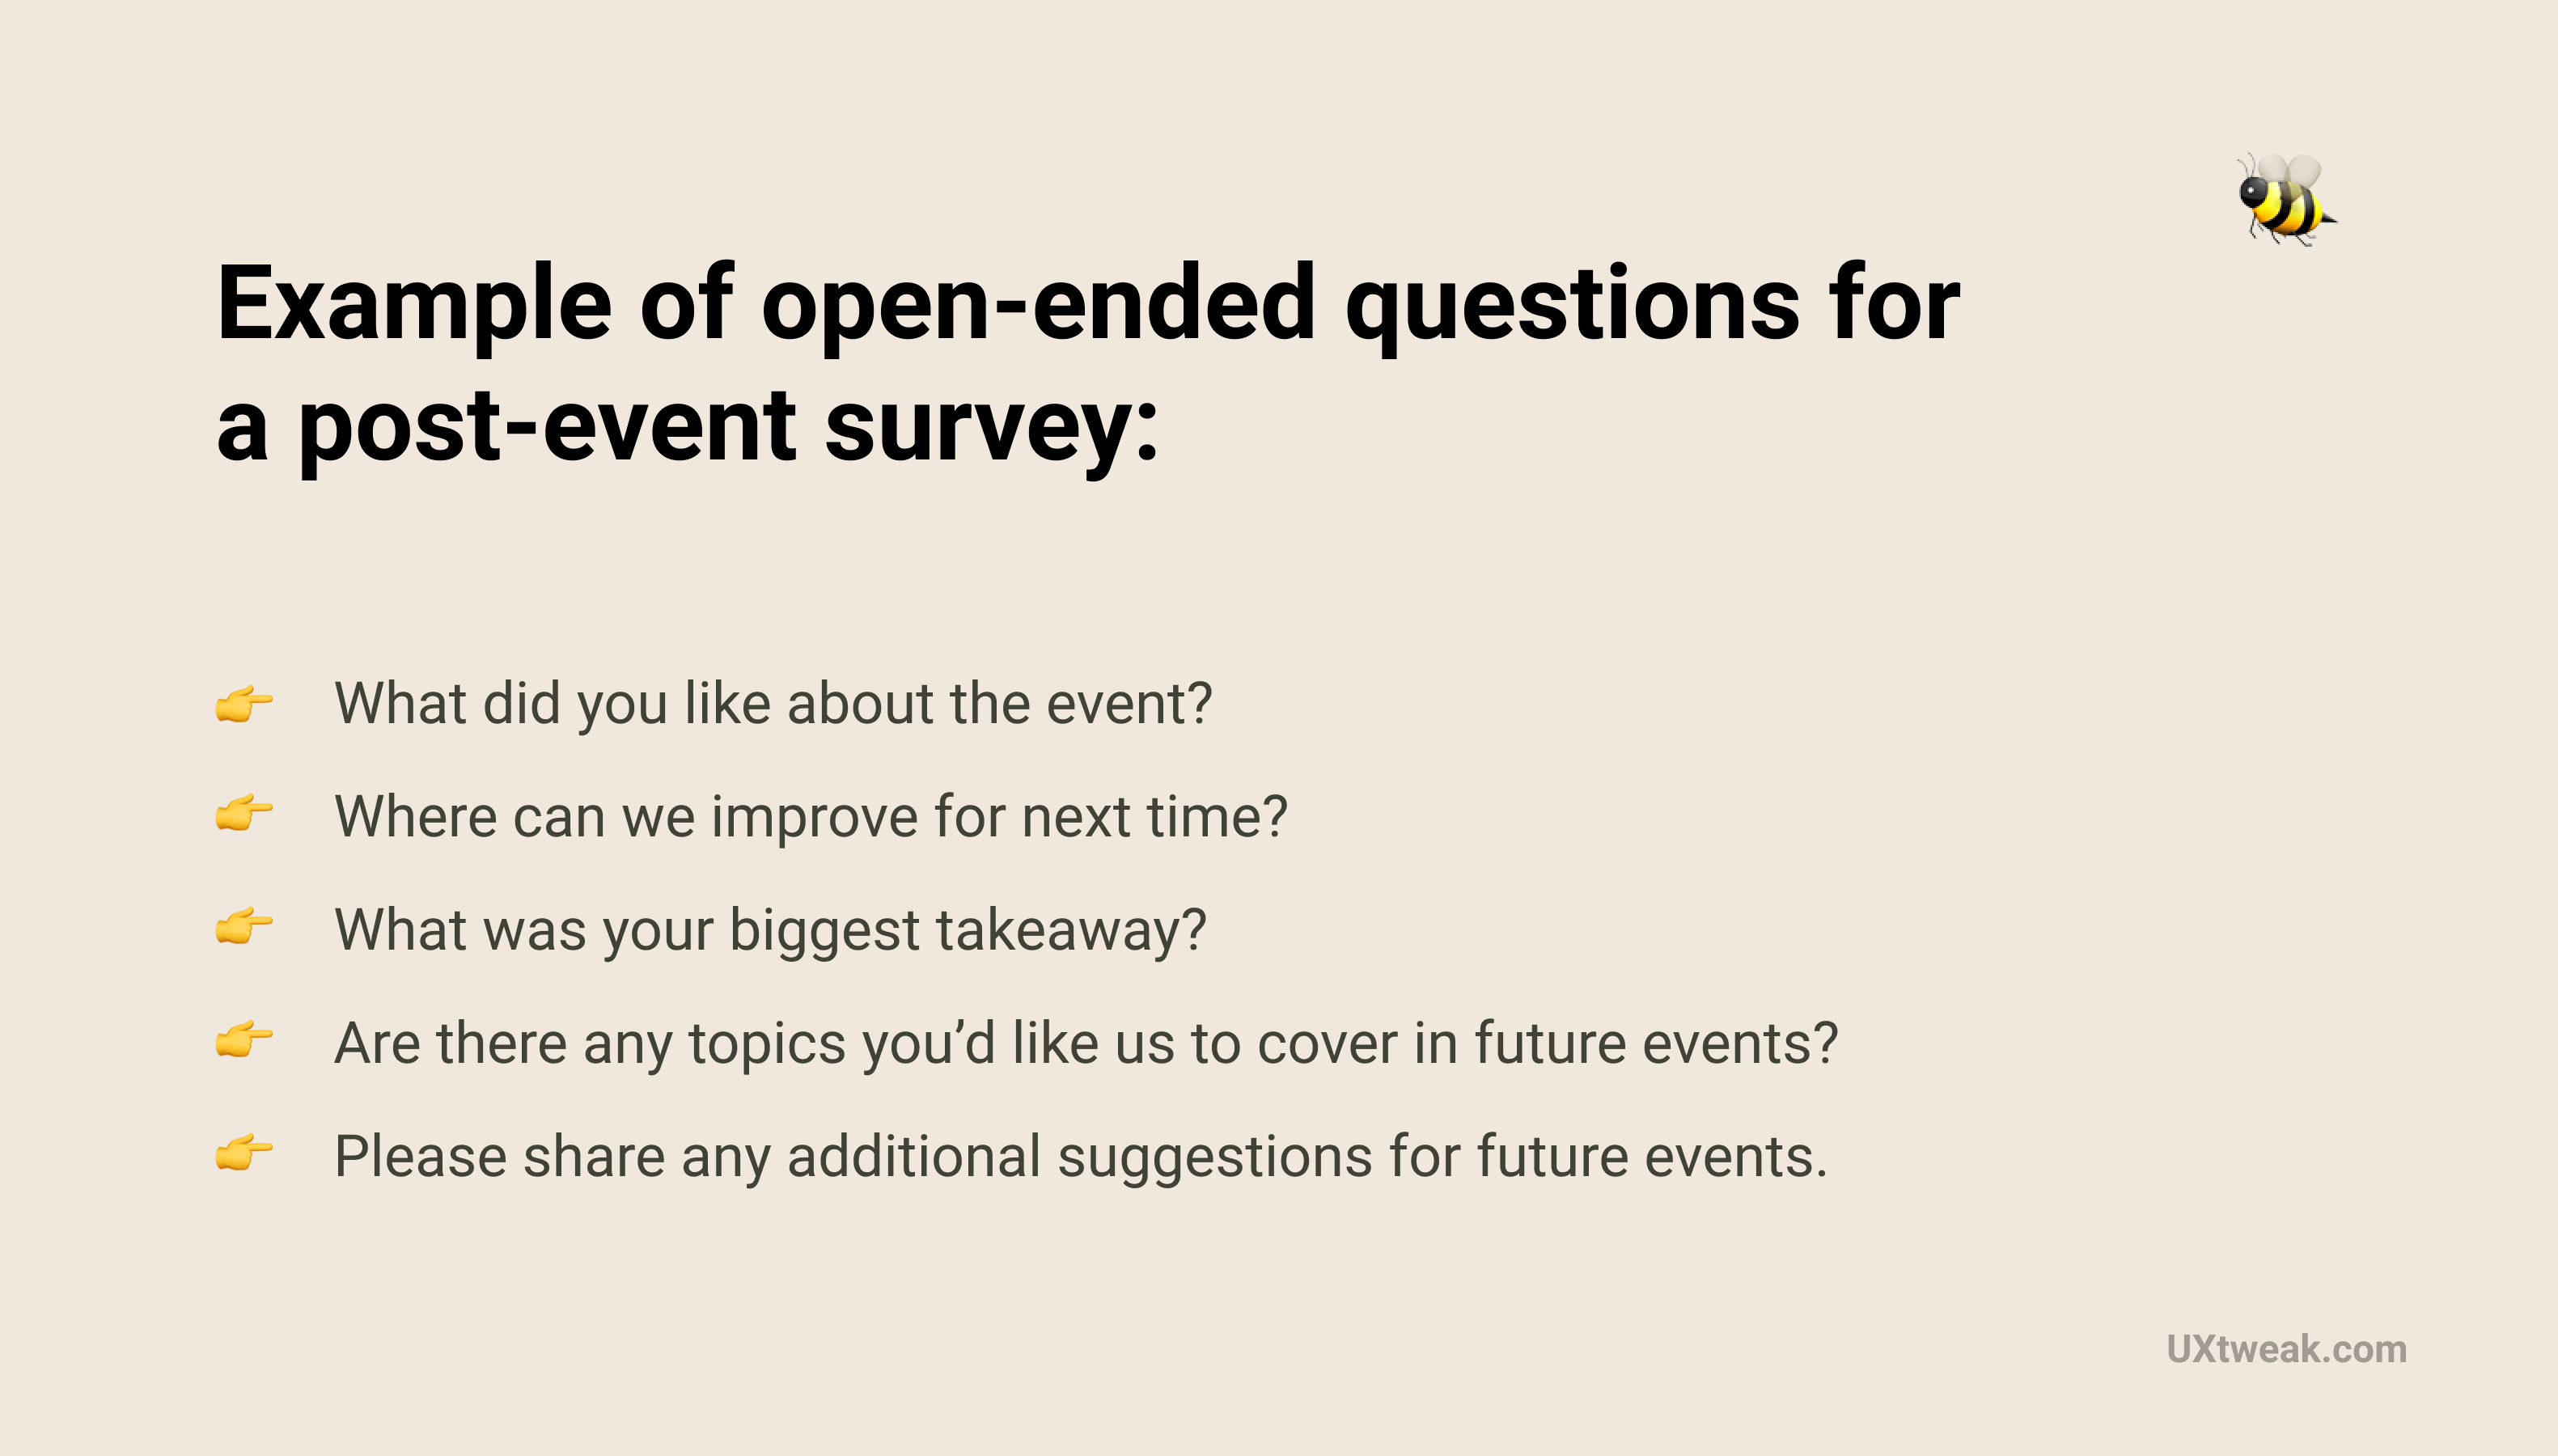 open-ended post-event survey questions